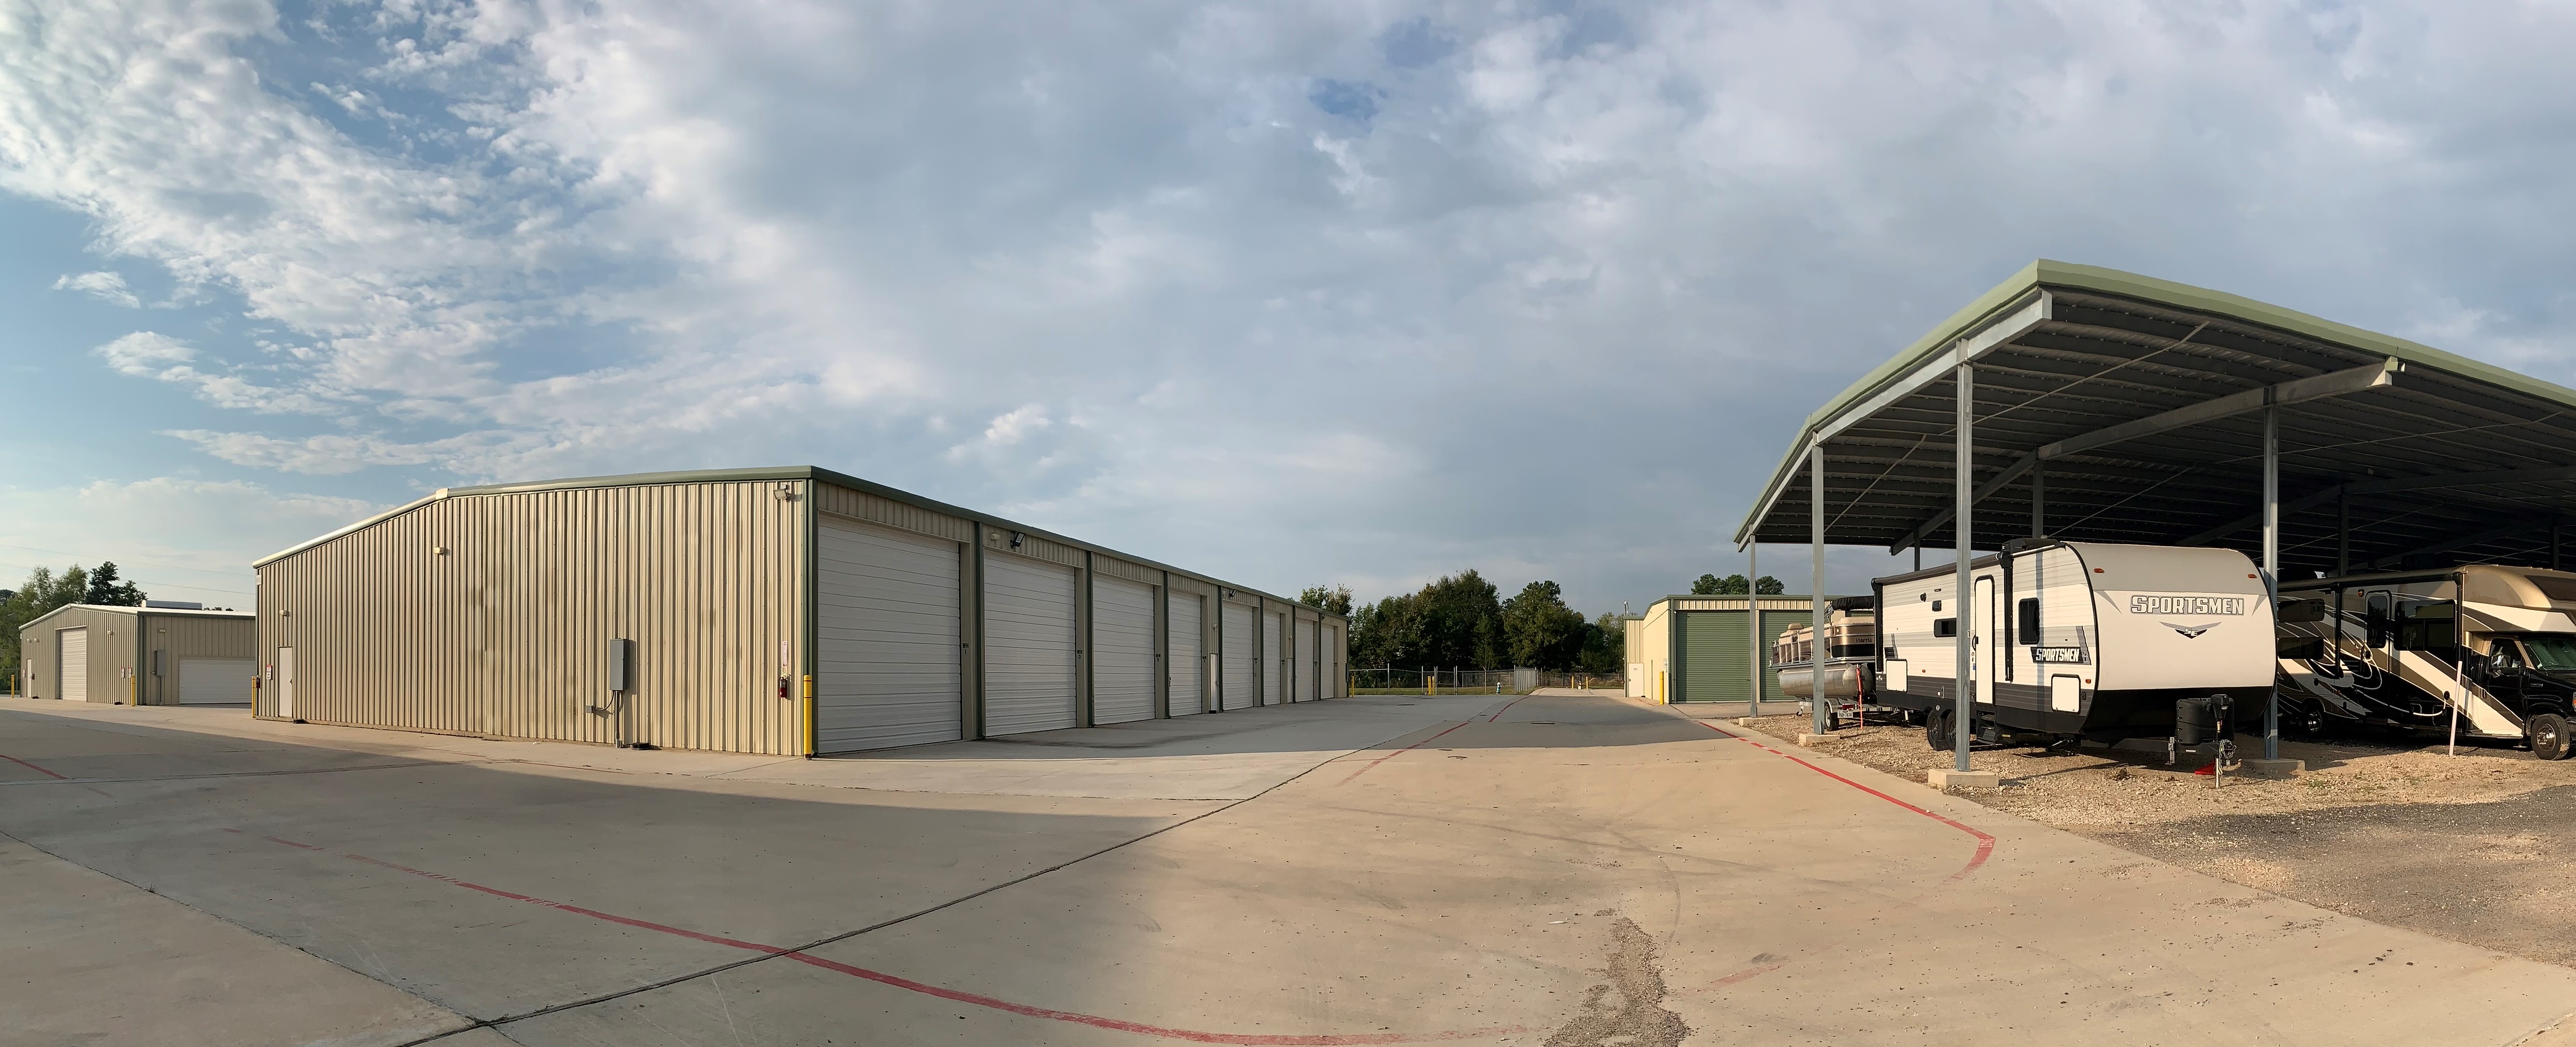 We Have Storage Units/Parking To Accommodate Any Of Your Needs